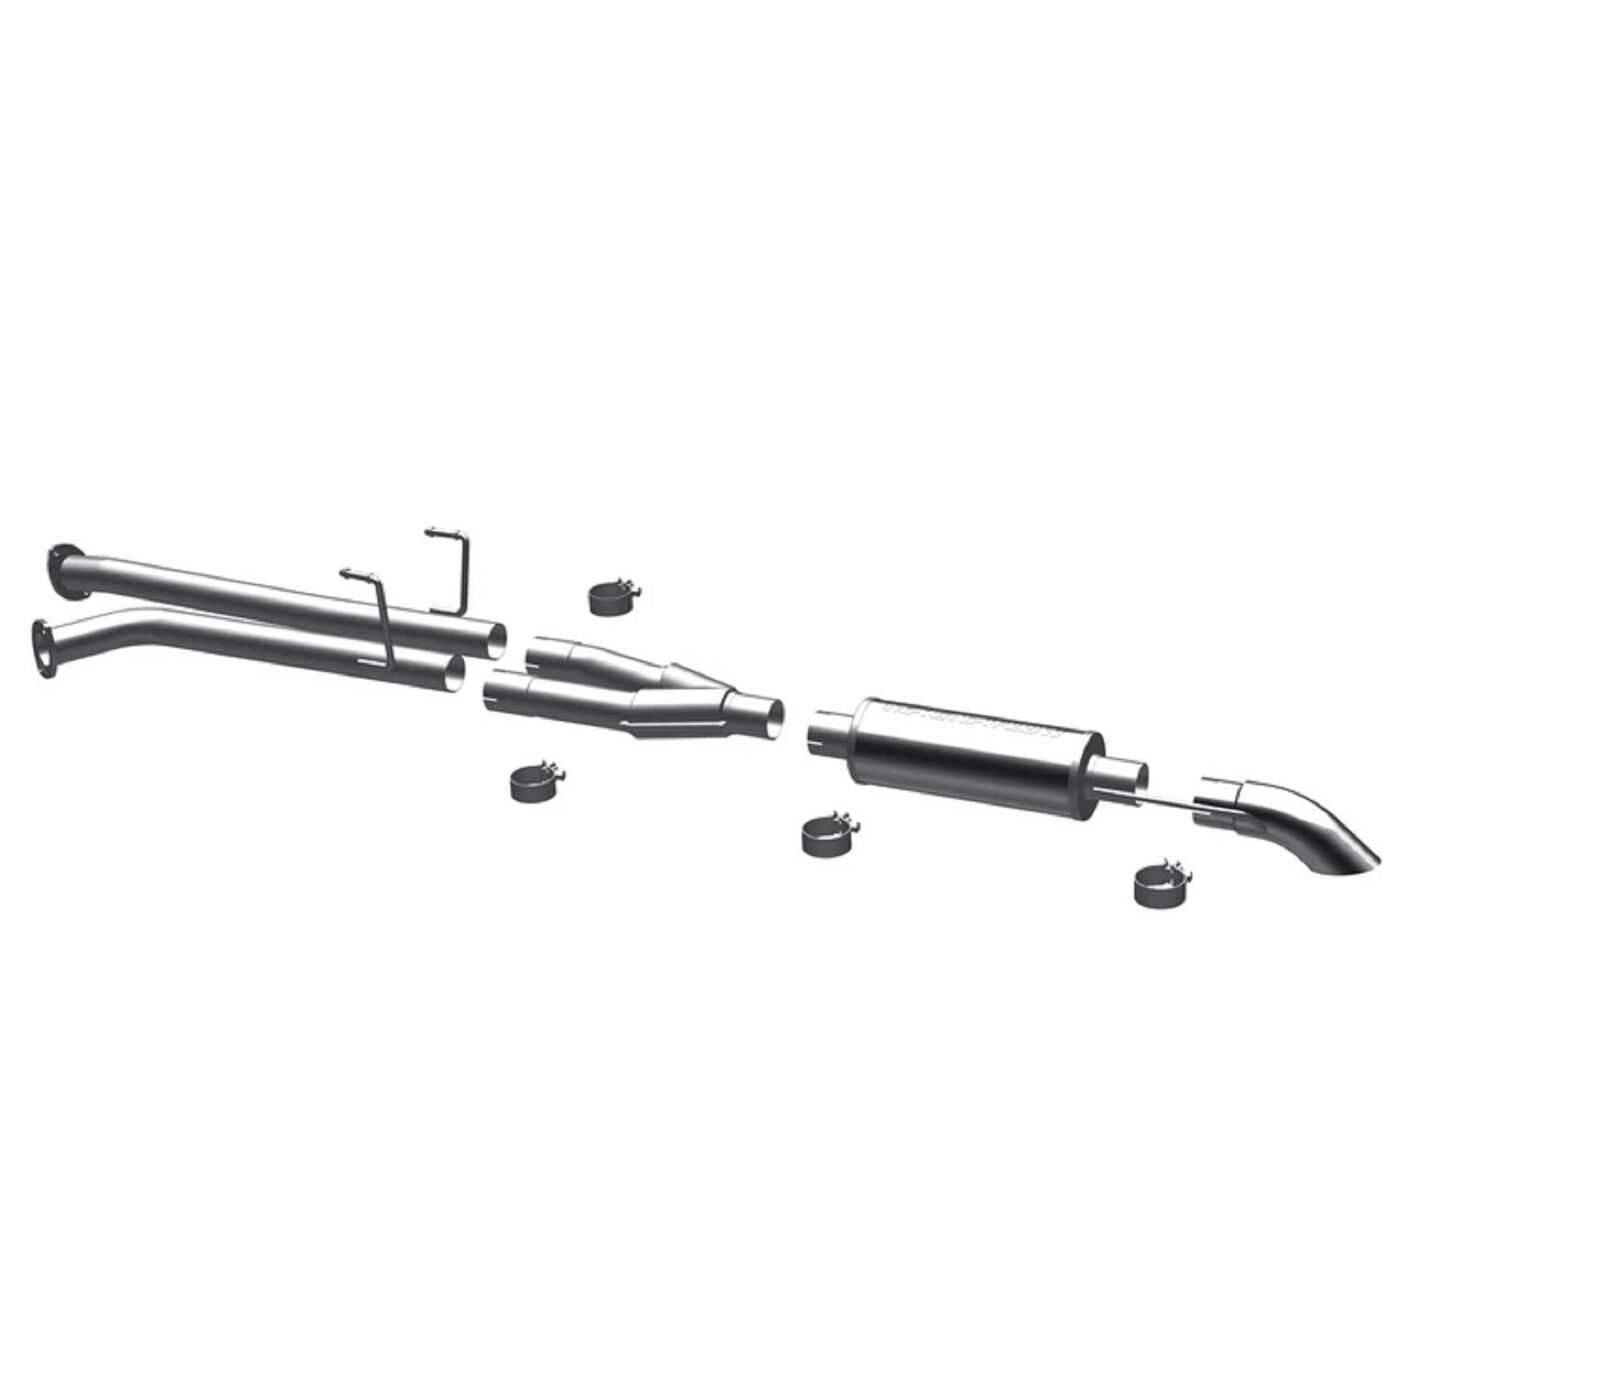 MAGNAFLOW 17112 Stainless Steel Cat-Back Exhaust Kit For 07-08 TUNDRA V8 5.7L